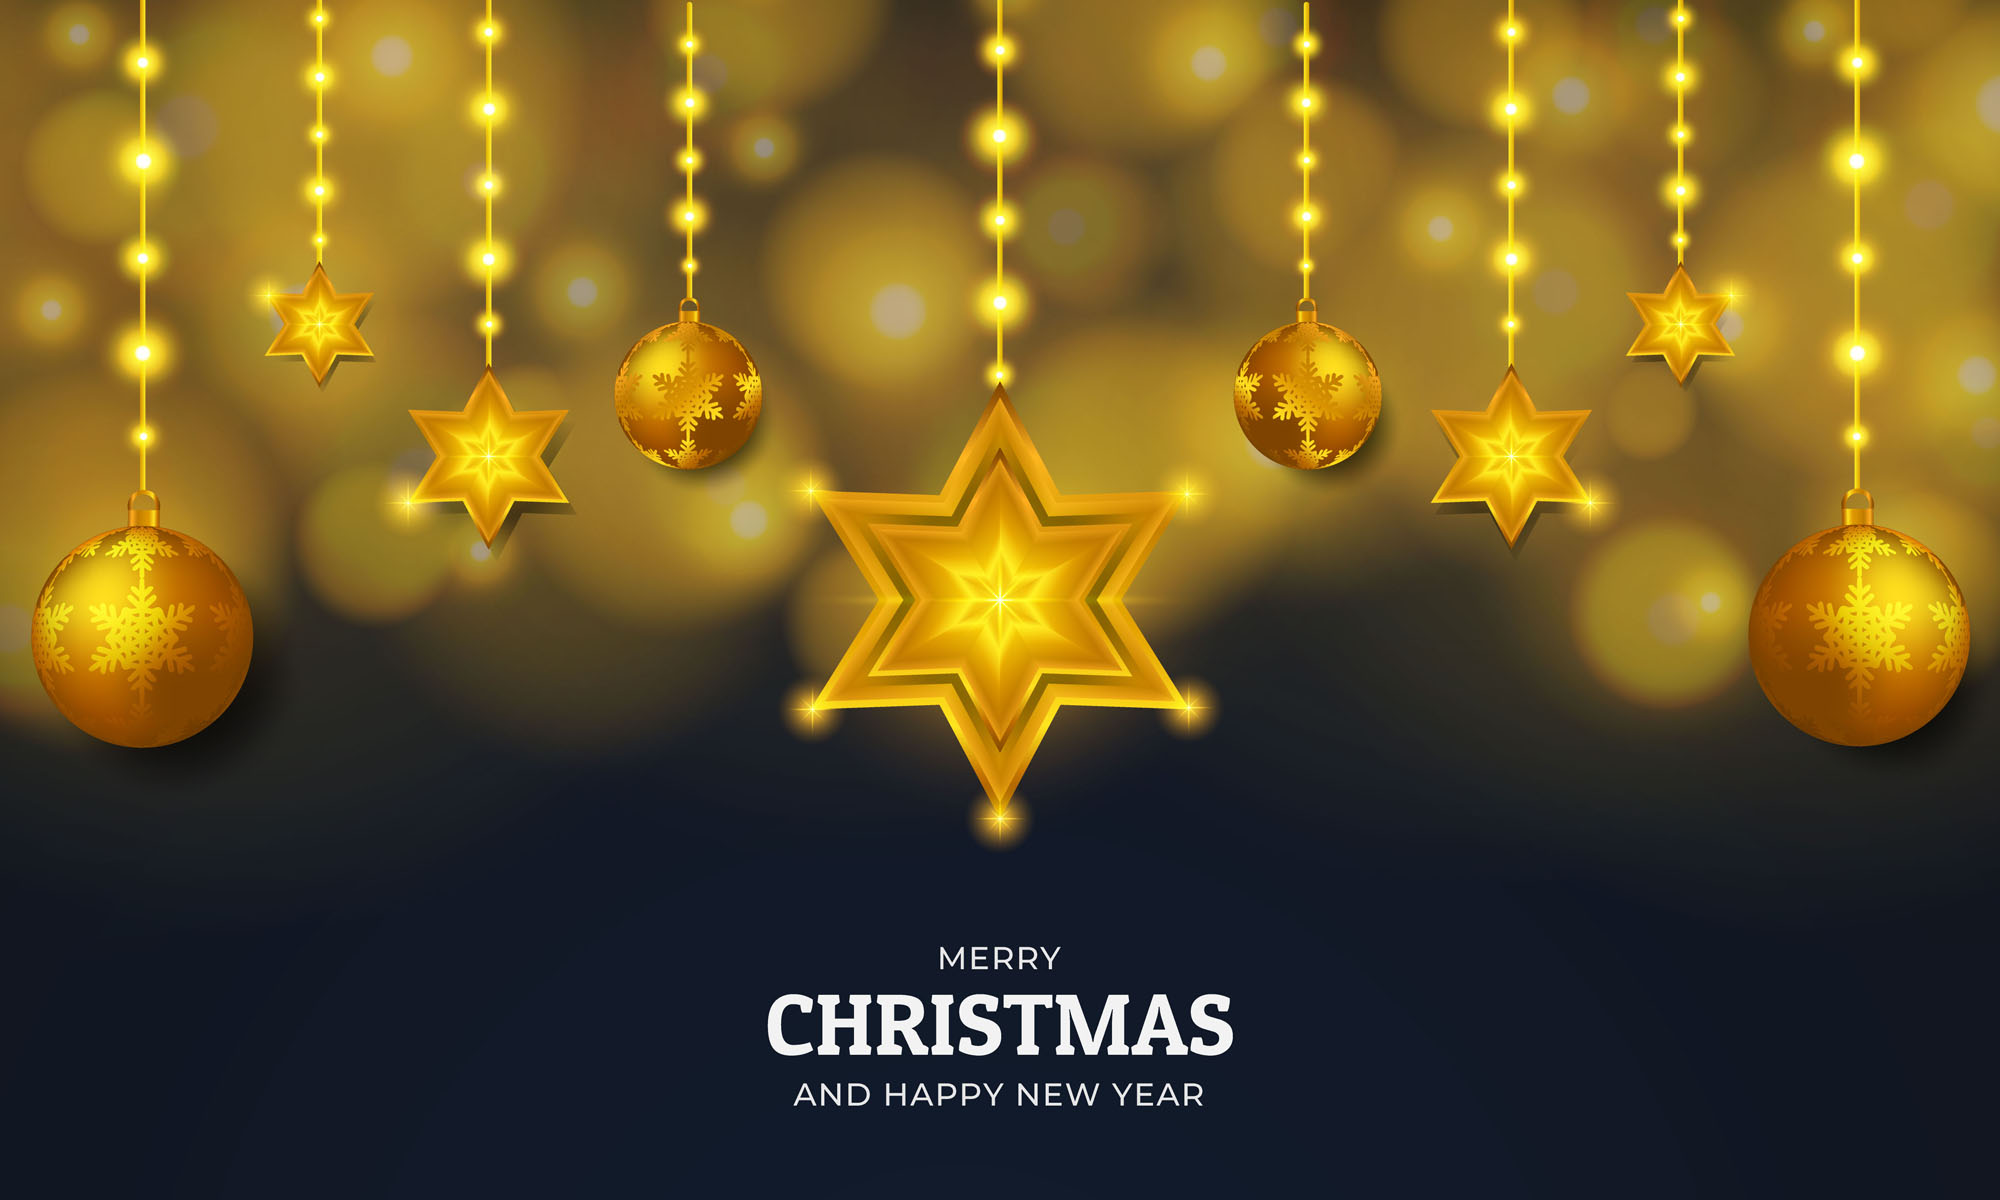 3 In One Christmas Background Design, black with golden star.